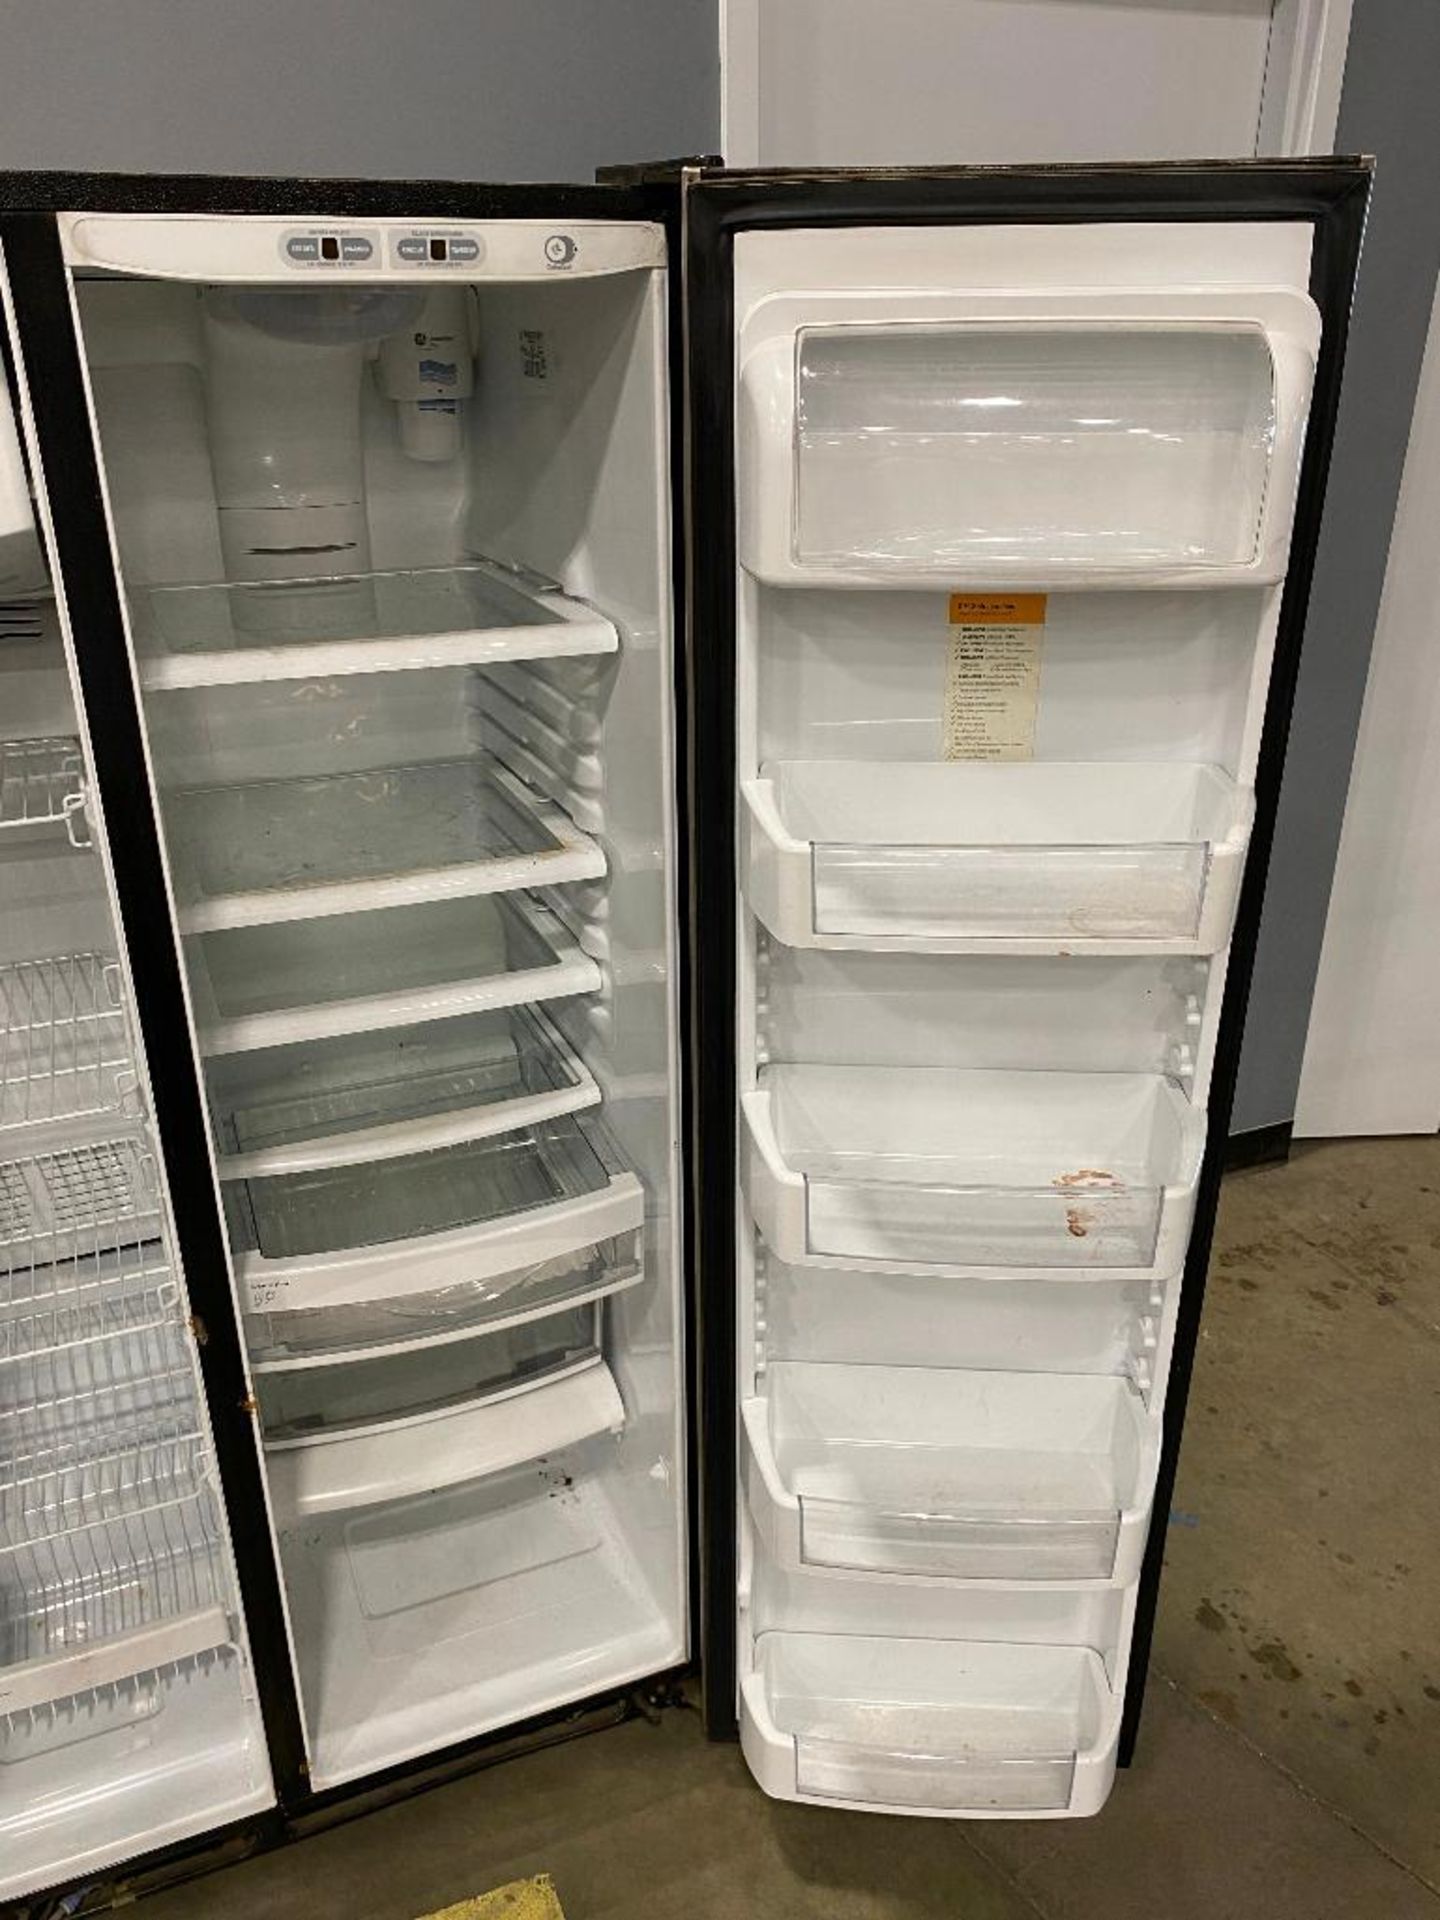 General Electric GSS25XSRC Refrigerator/ Freezer - Image 6 of 7